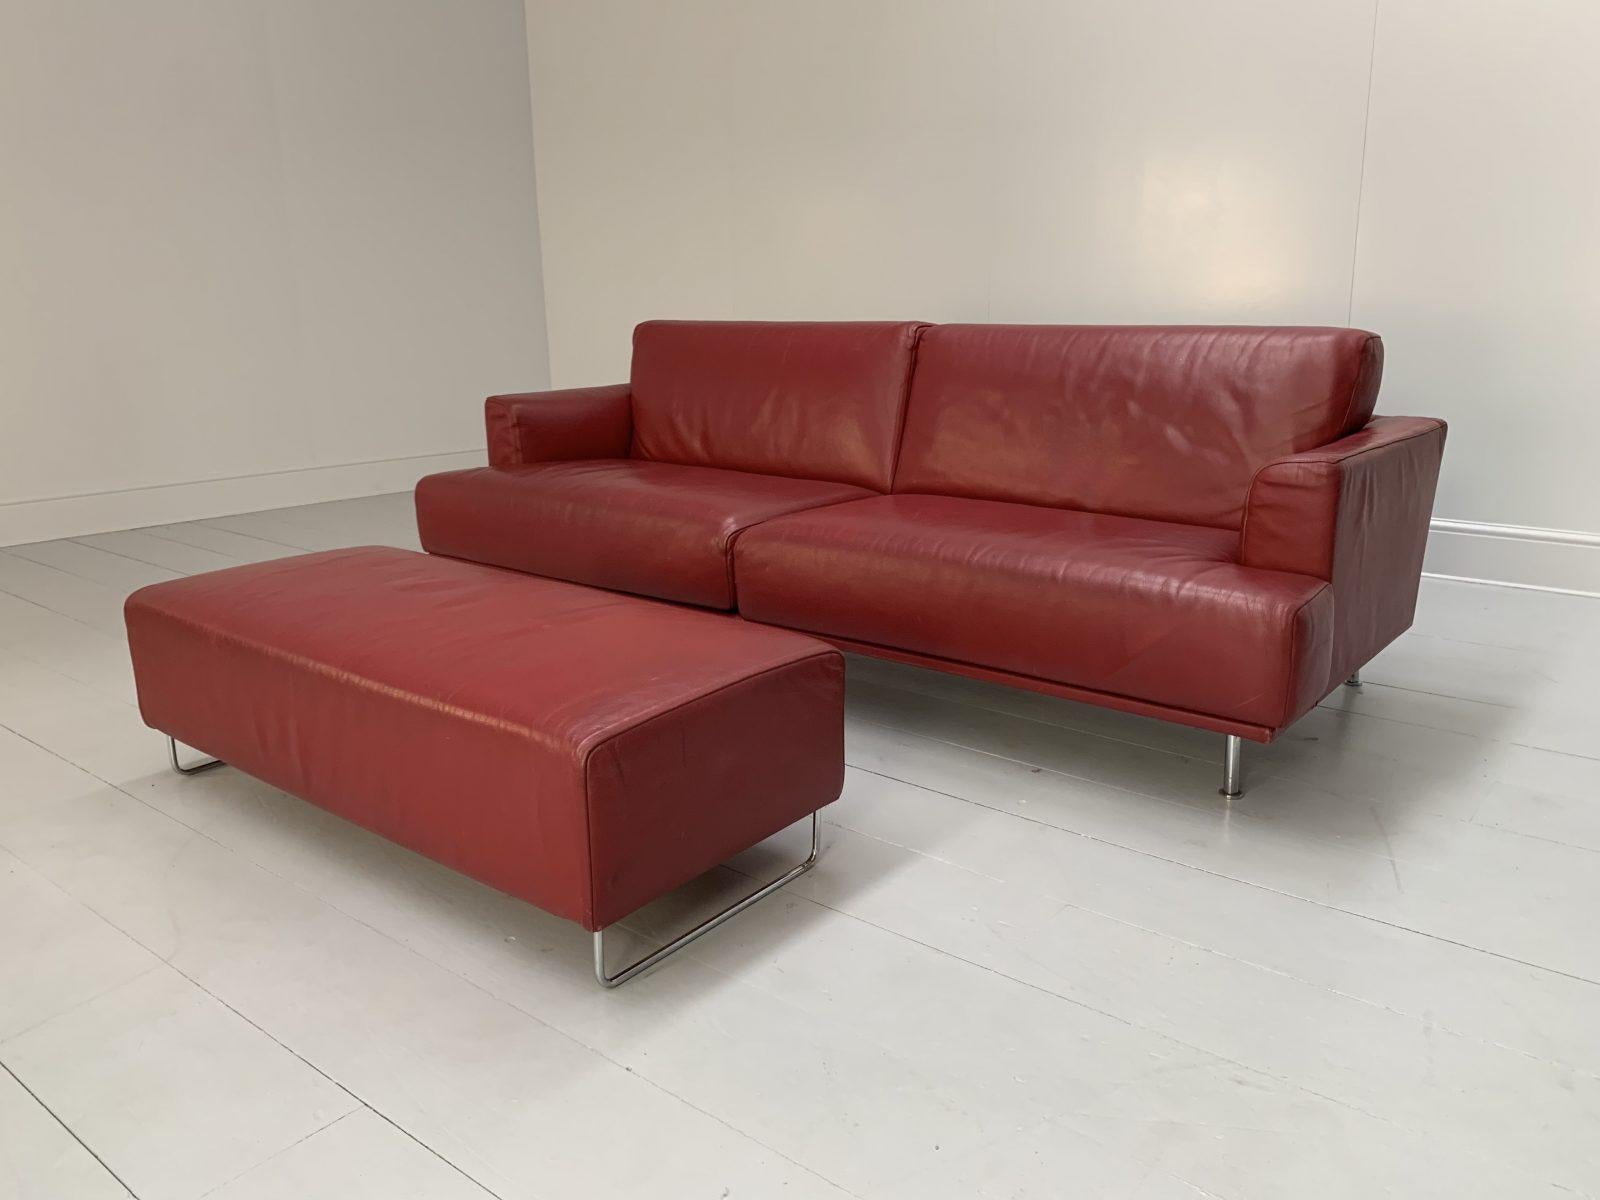 Contemporary Cassina “253 Nest” 2.5-Seat Sofa & Bench Footstool – In Red “Pelle” Leather